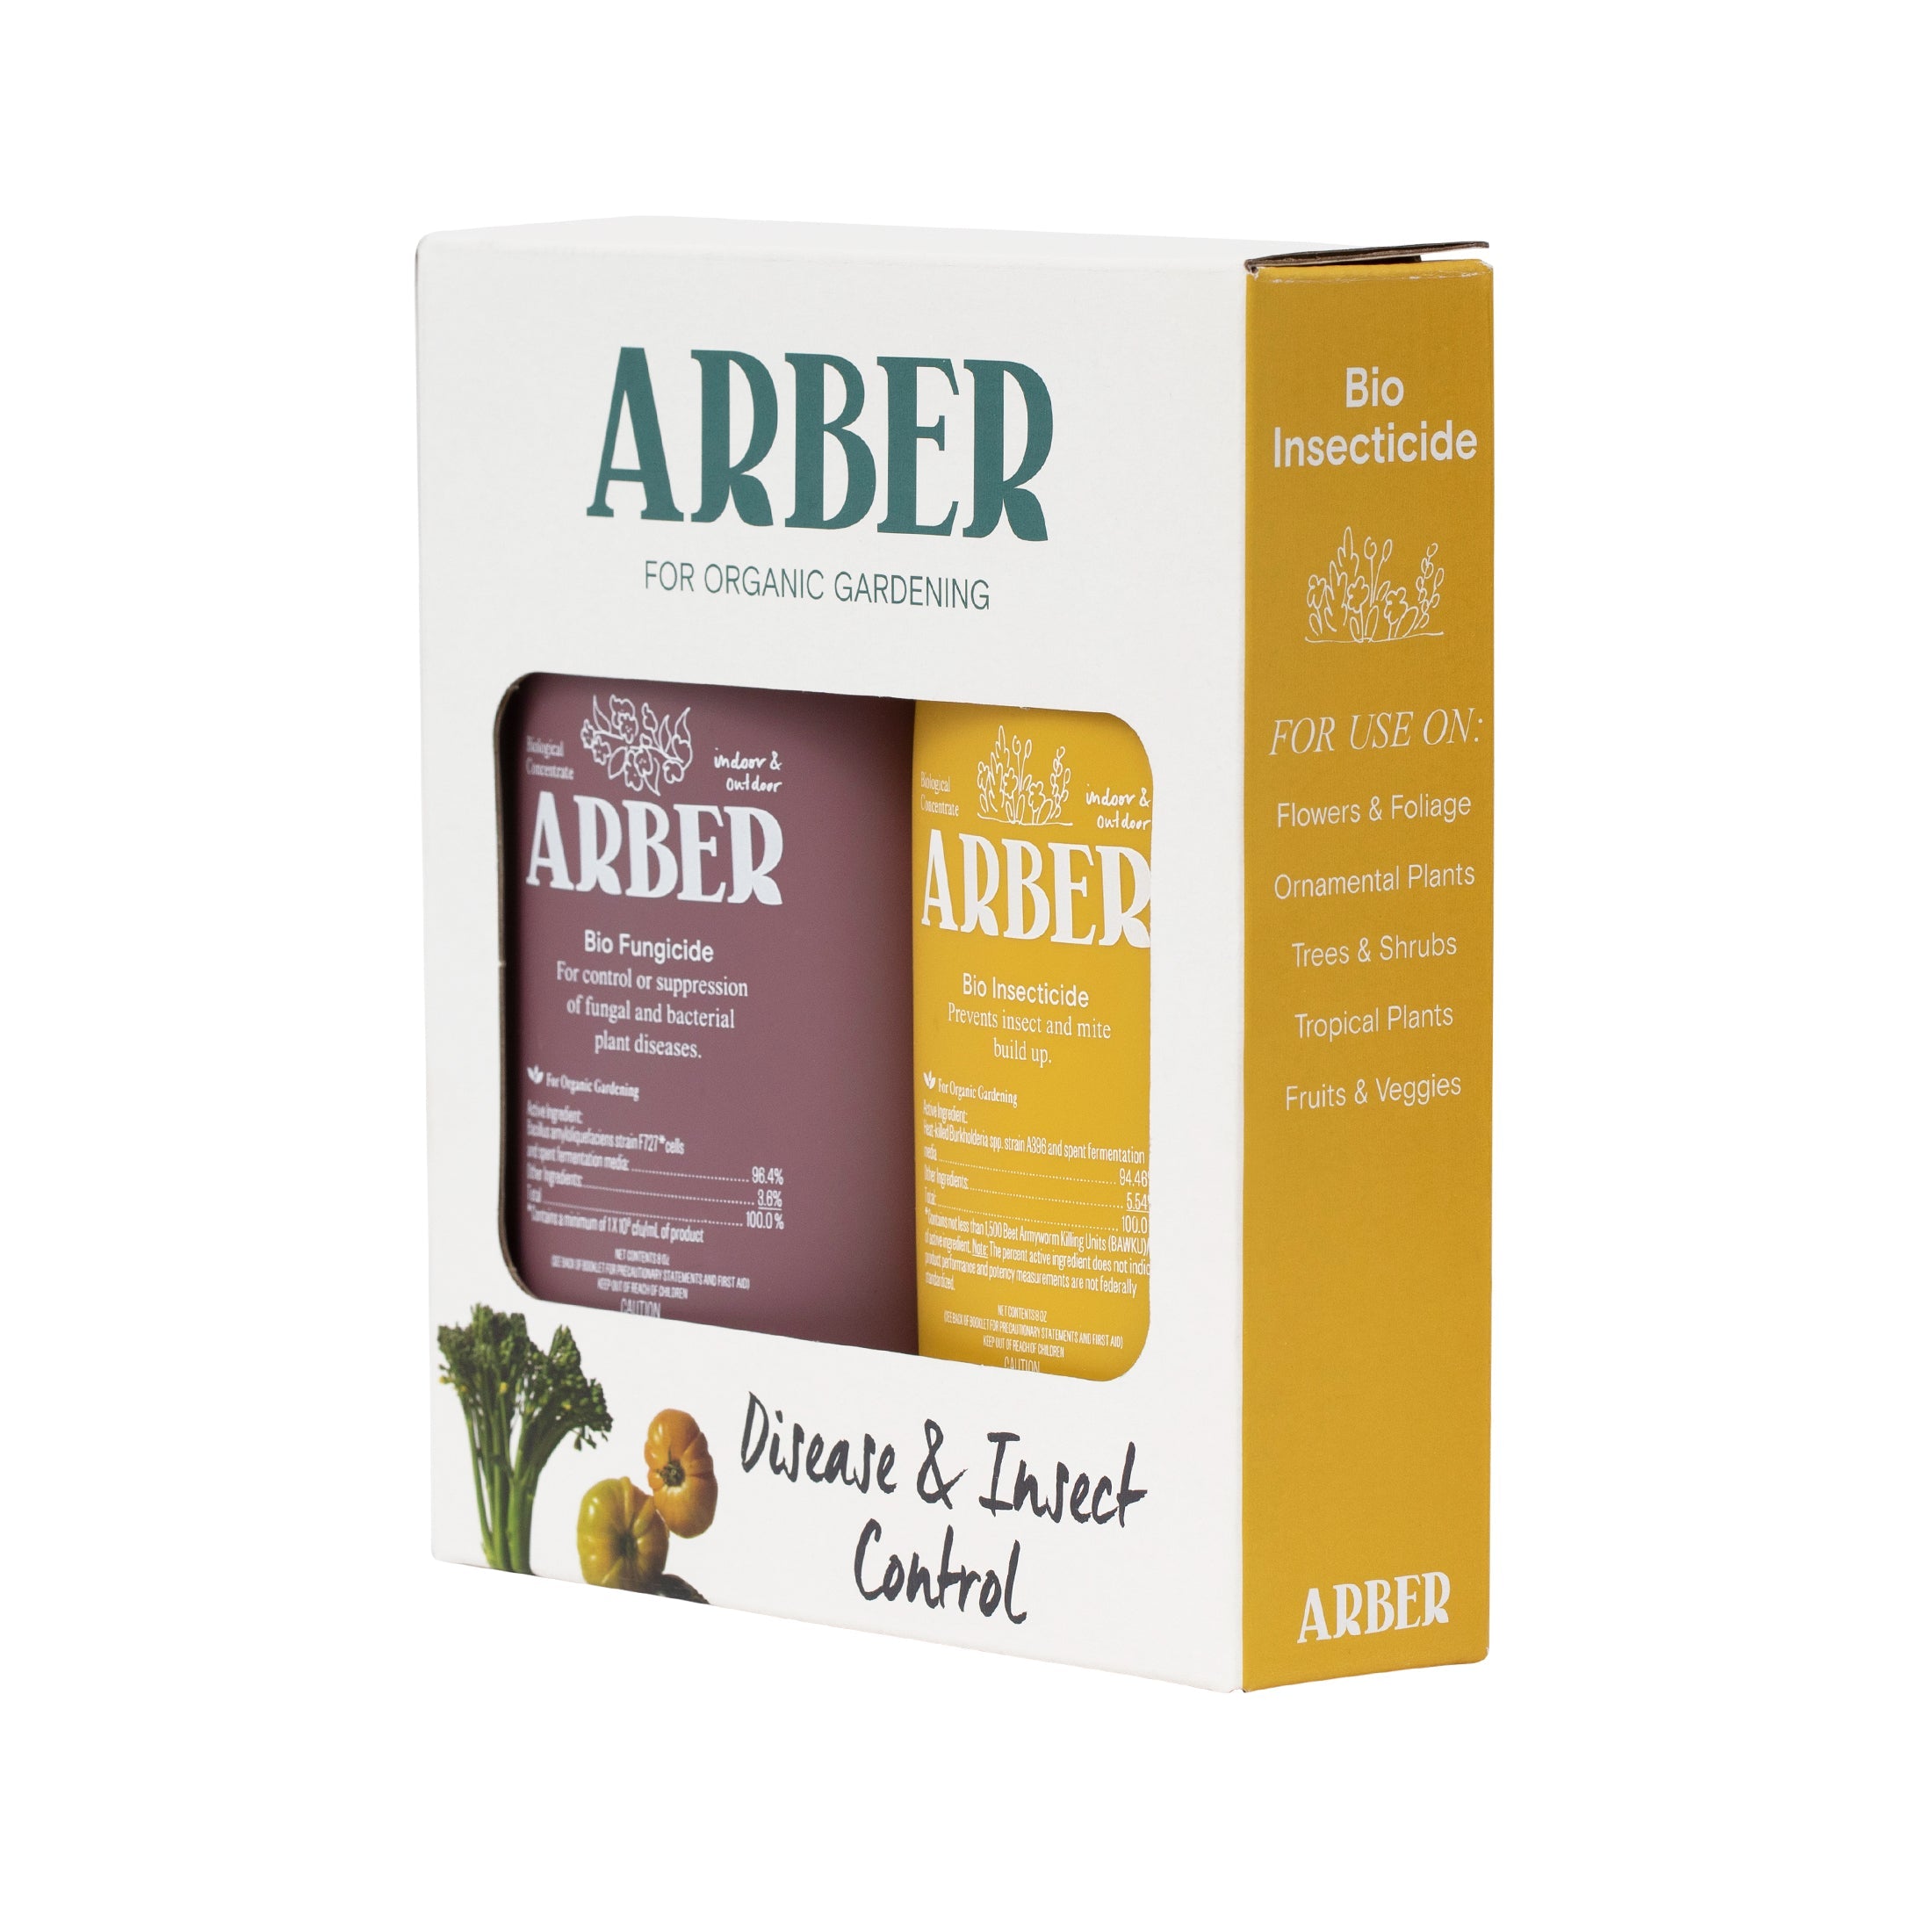 Disease & Insect Control Starter Set - Arber